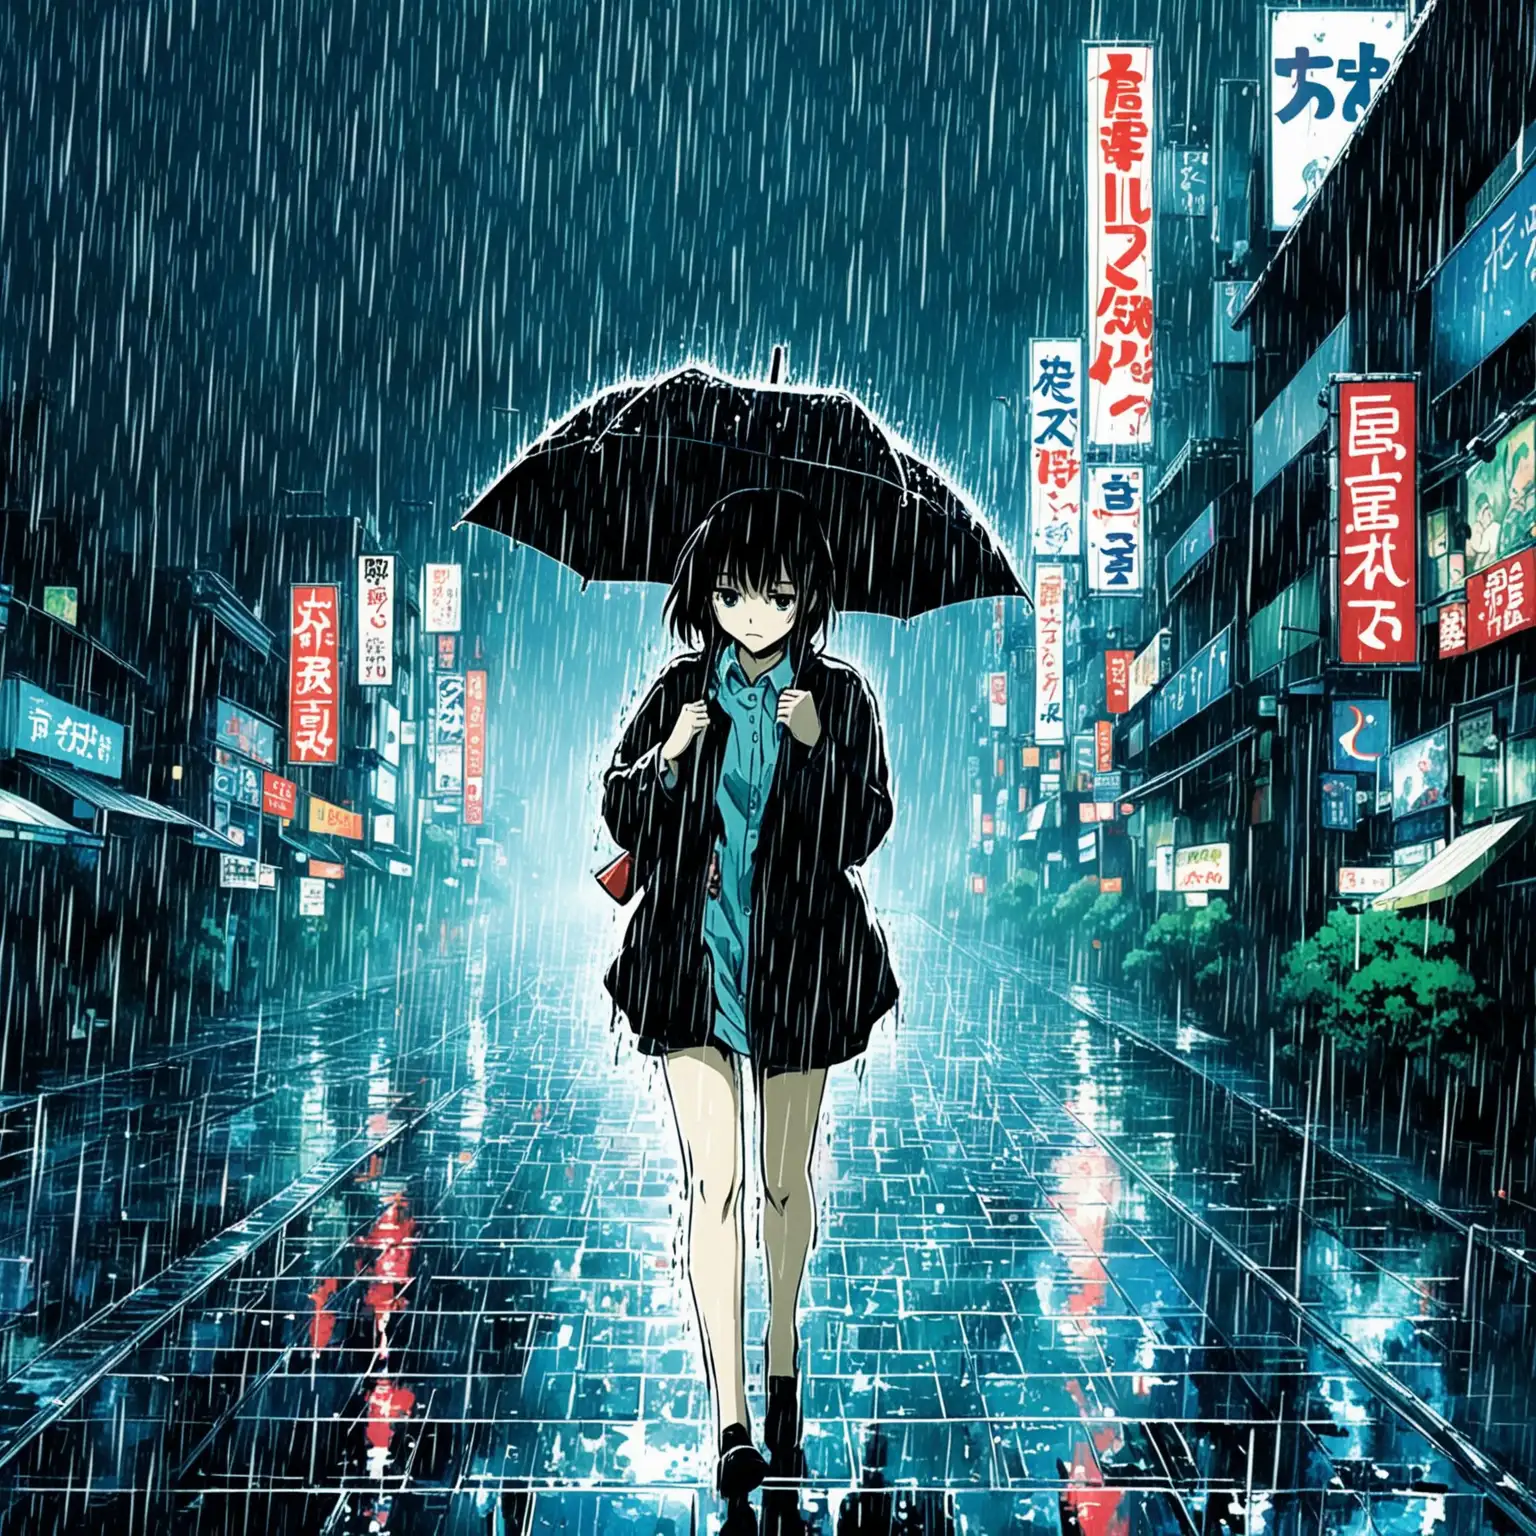 Stylized Anime Girl Caught in Rain Tokyo Song Cover Image